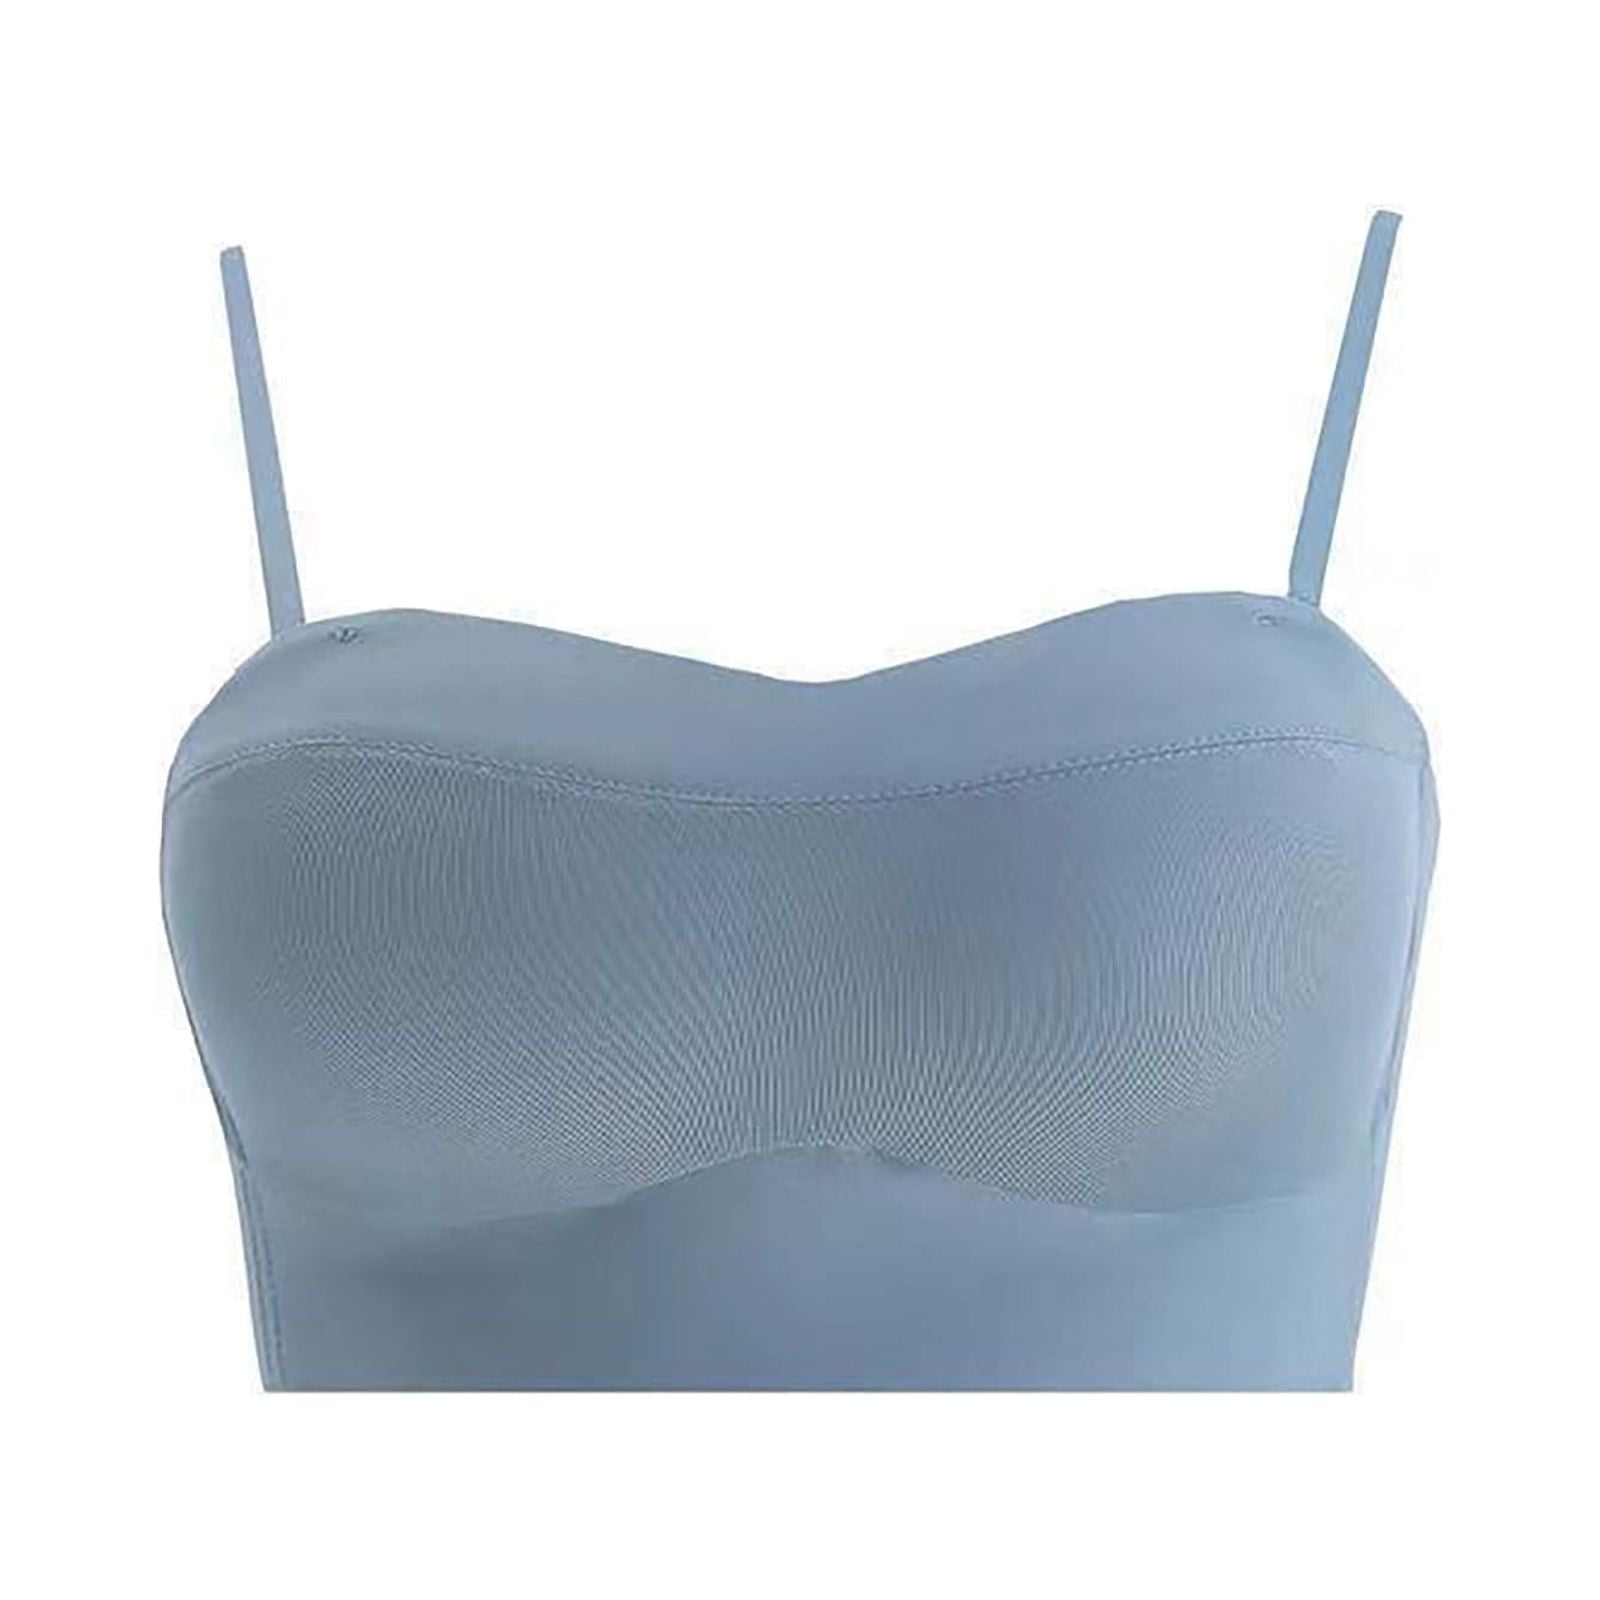 Buy Strapless Tube Bra with Detachable Transparent Straps In Blue Online  India, Best Prices, COD - Clovia - BR0377P08